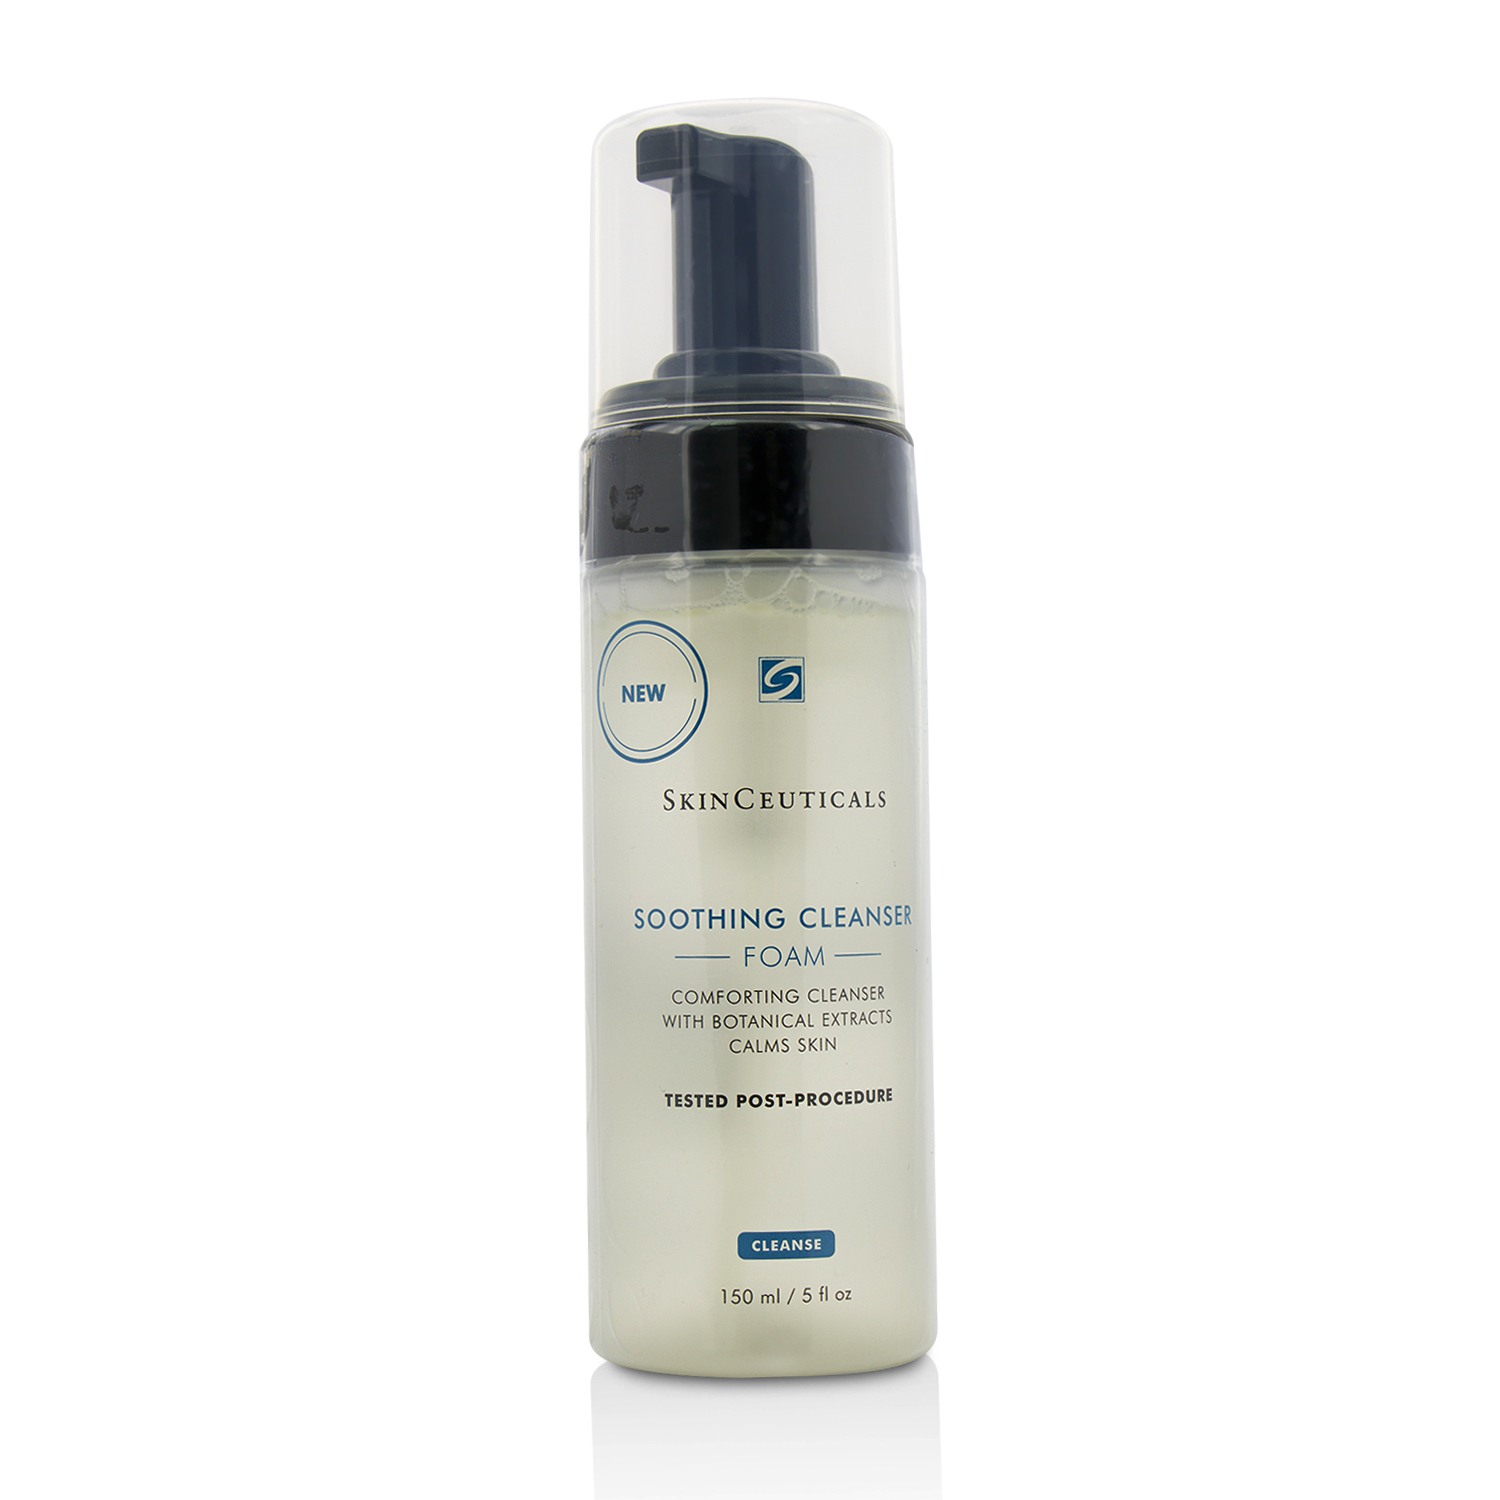 Soothing cleanser. Skinceuticals Soothing Foam. Skinceuticals Soothing Cleanser. Comfort Foam Skinceuticals. Скин Сьютикалс Soothing Cleanser Comfort Foam.